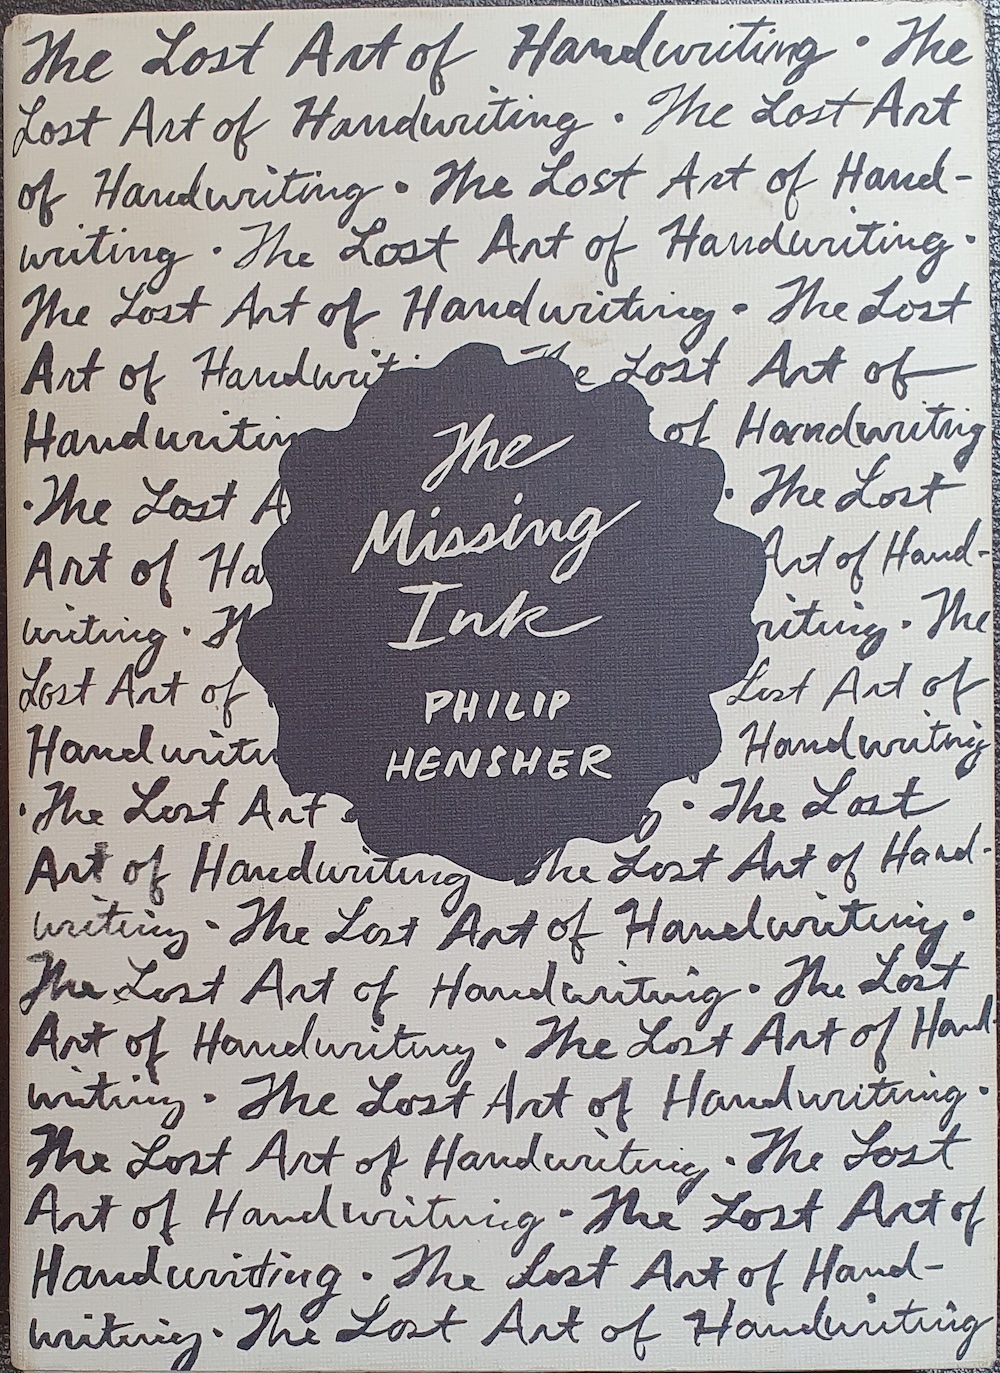 The Missing Ink: The Lost Art of Handwriting By Philip Hensher ...